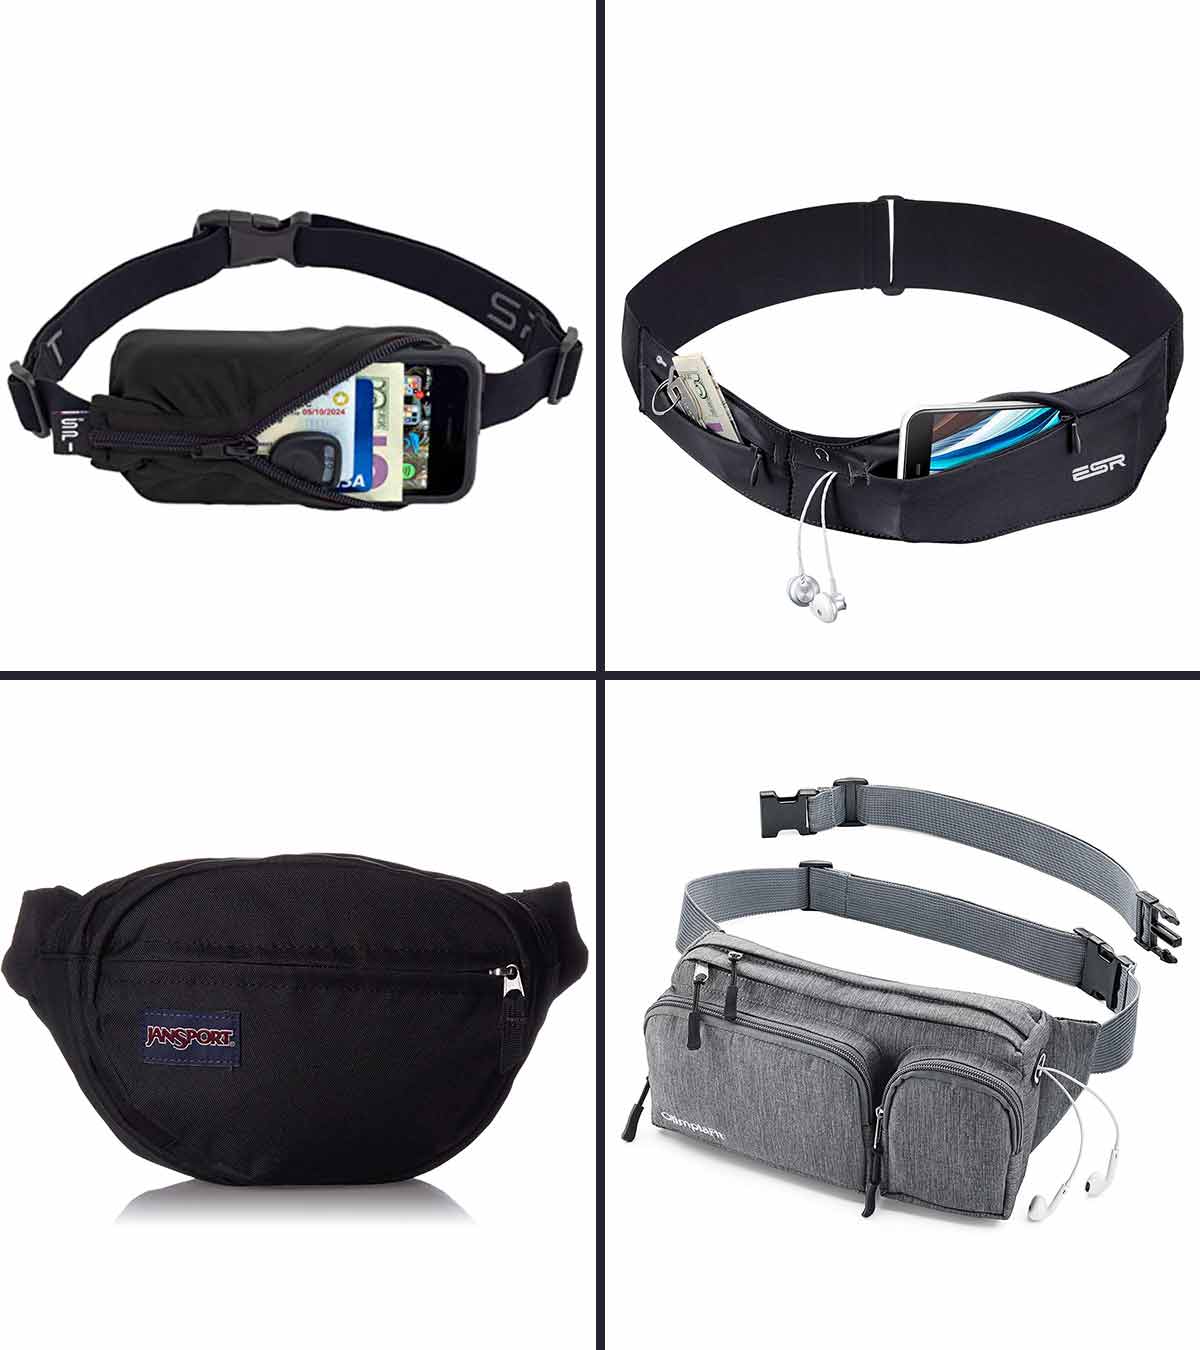 Outdoor Sports Waist Bag Packs for Running Walking Traveling REDCAMP Hiking Fanny Pack with Water Bottle Holder 